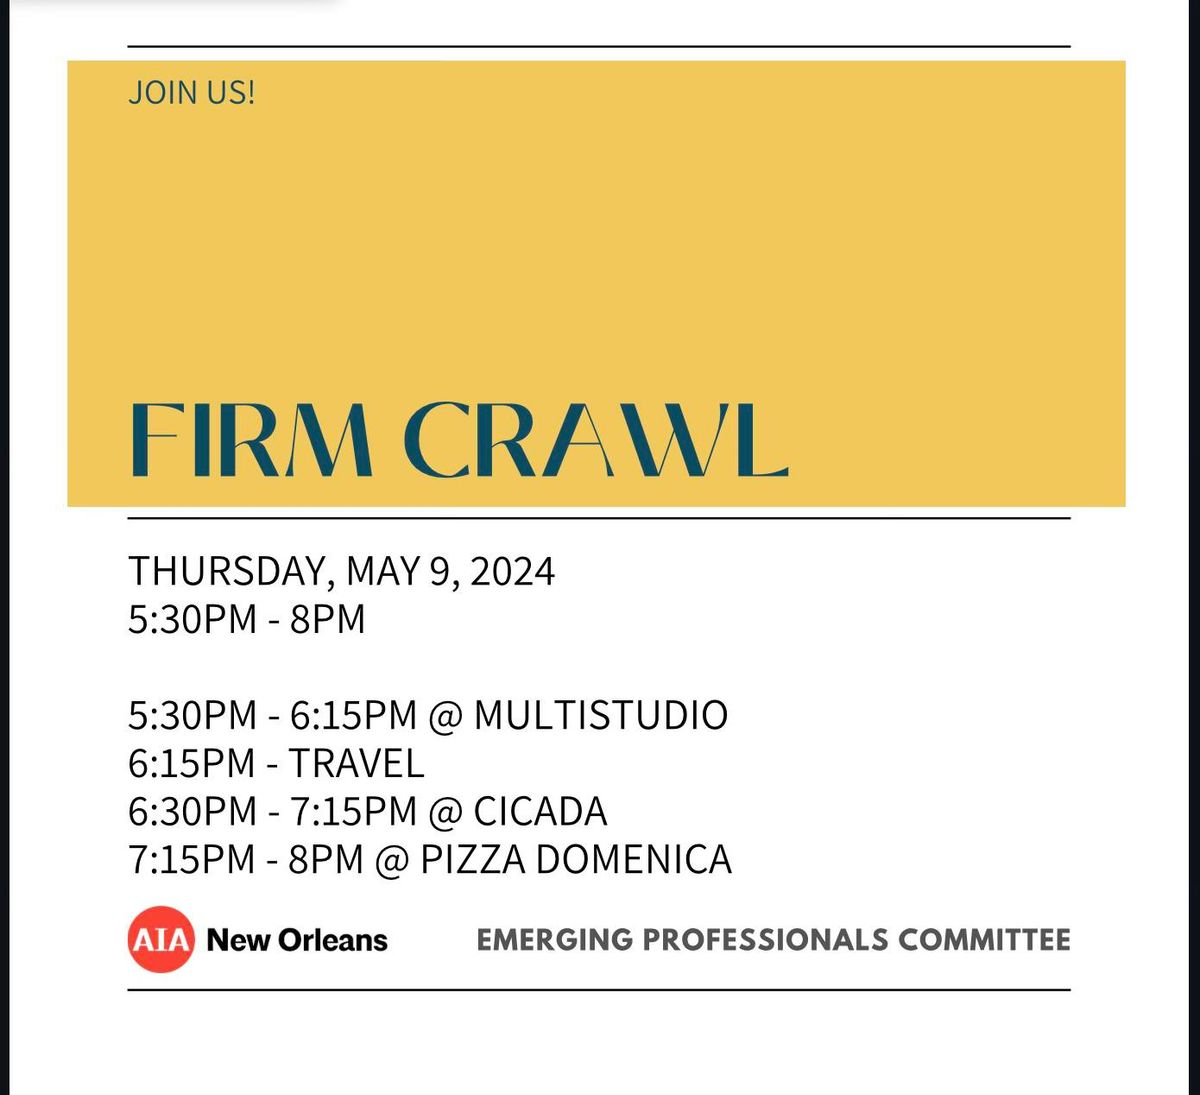 Springtime Firm Crawl: Emerging Professionals Committee